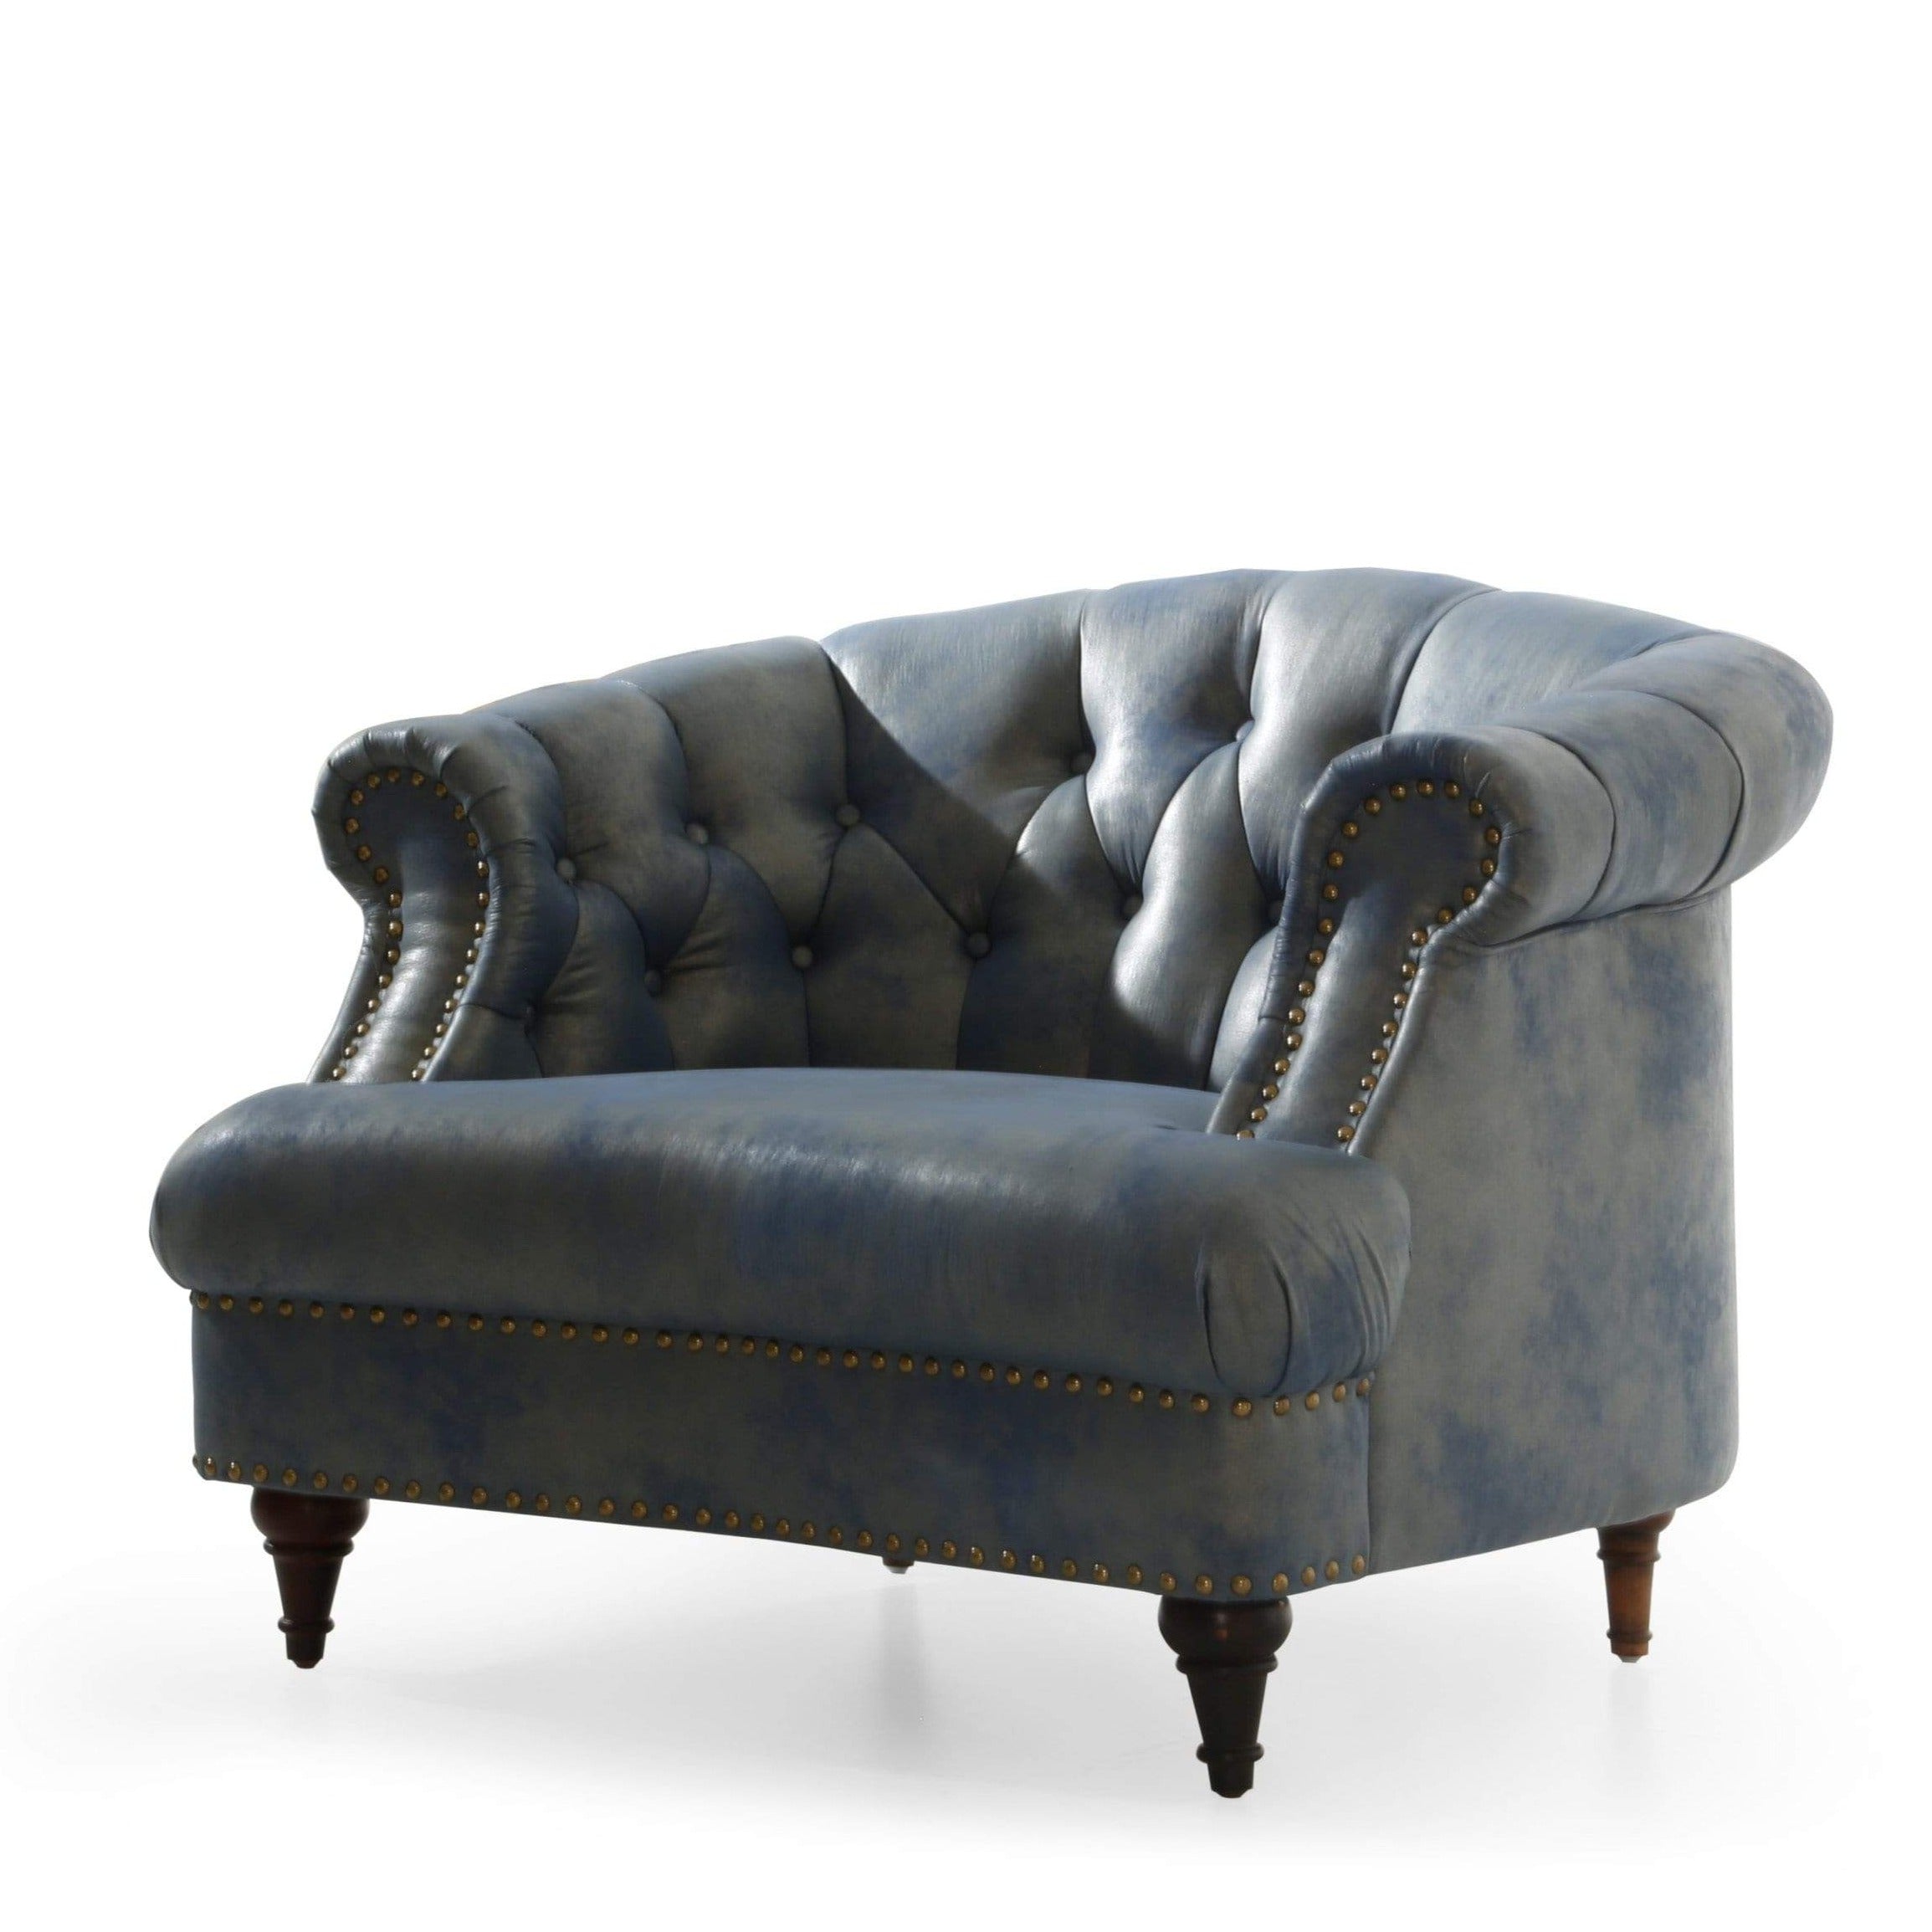 Embry Tufted PU Leather Club Chair